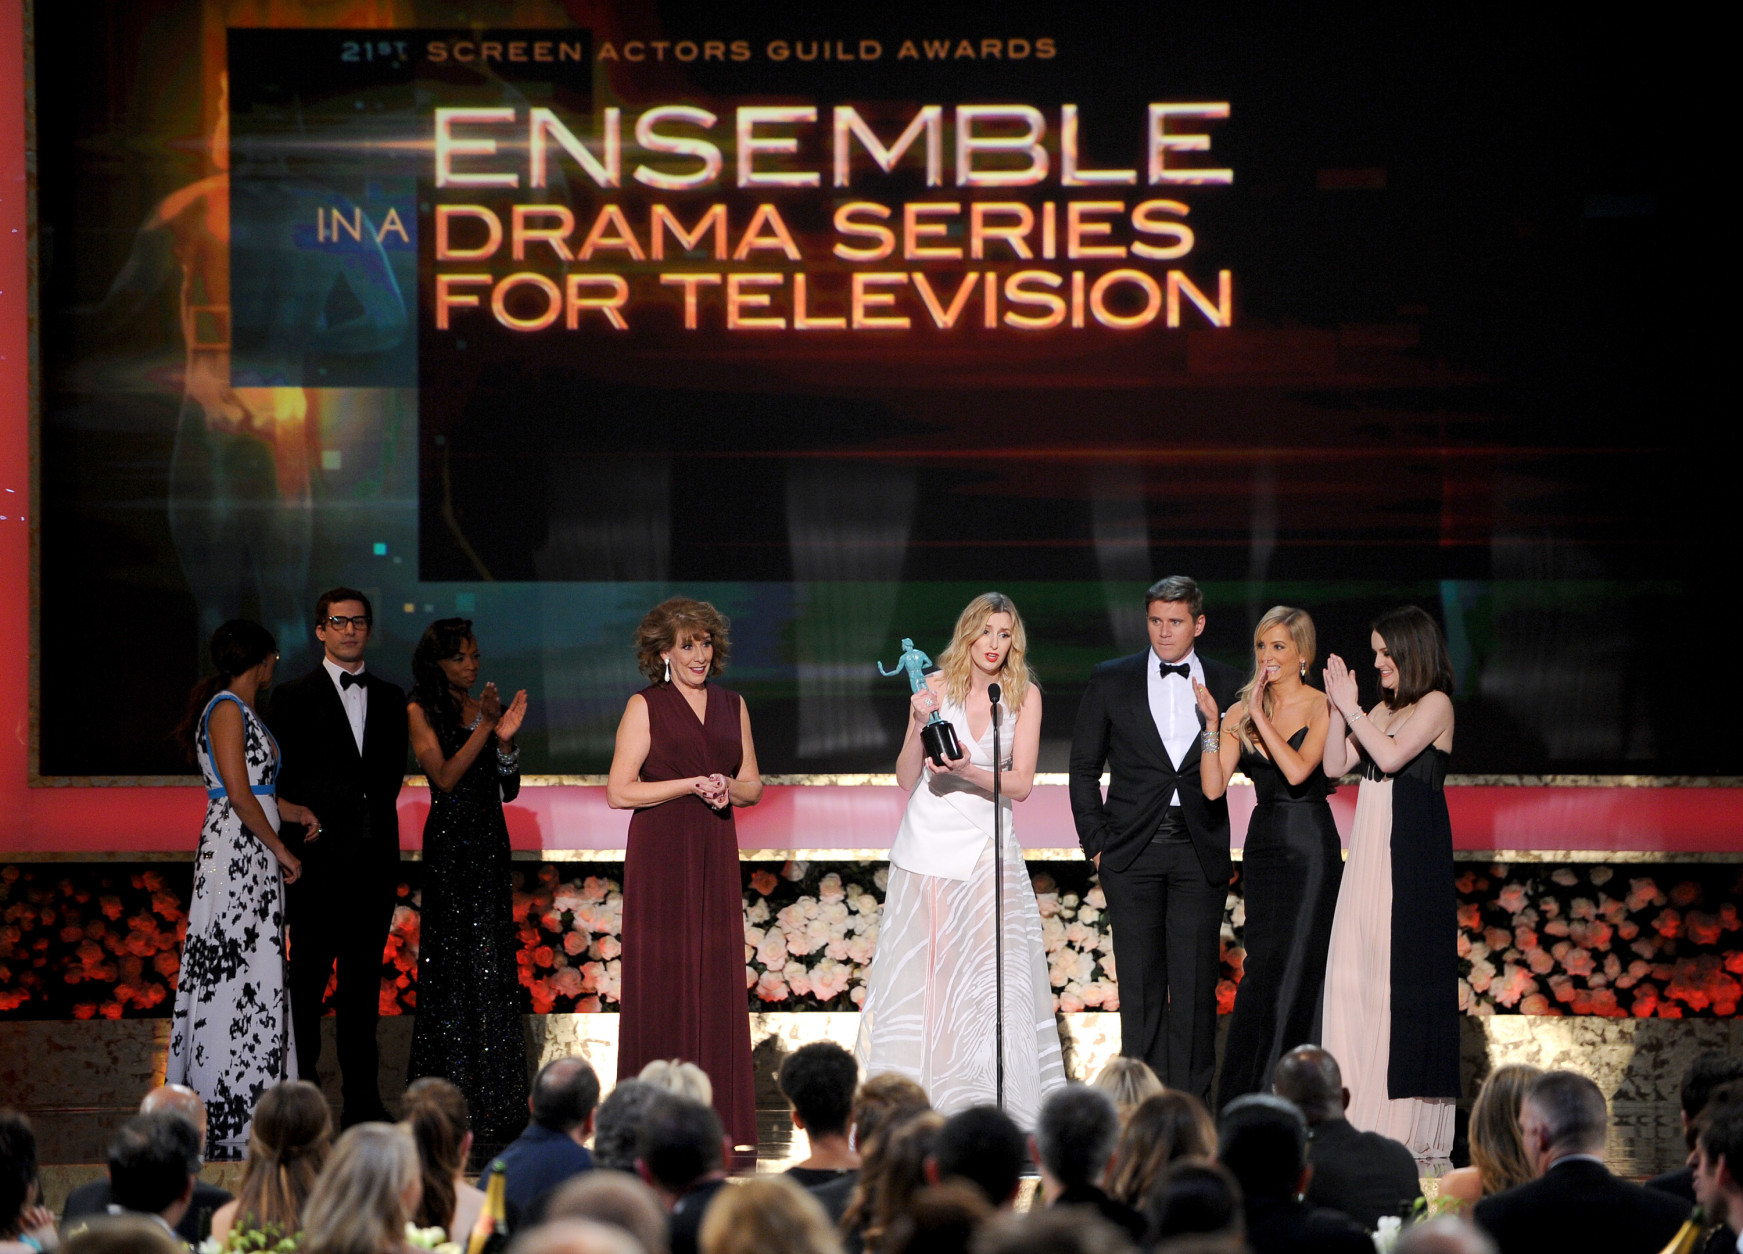 Joanne Froggatt, center, accepts the award for outstanding performance by a ensemble in a drama series for Downton Abbey next to fellow cast members on stage during the 21st annual Screen Actors Guild Awards at the Shrine Auditorium on Sunday, Jan. 25, 2015, in Los Angeles. (Photo by Vince Bucci/Invision/AP)